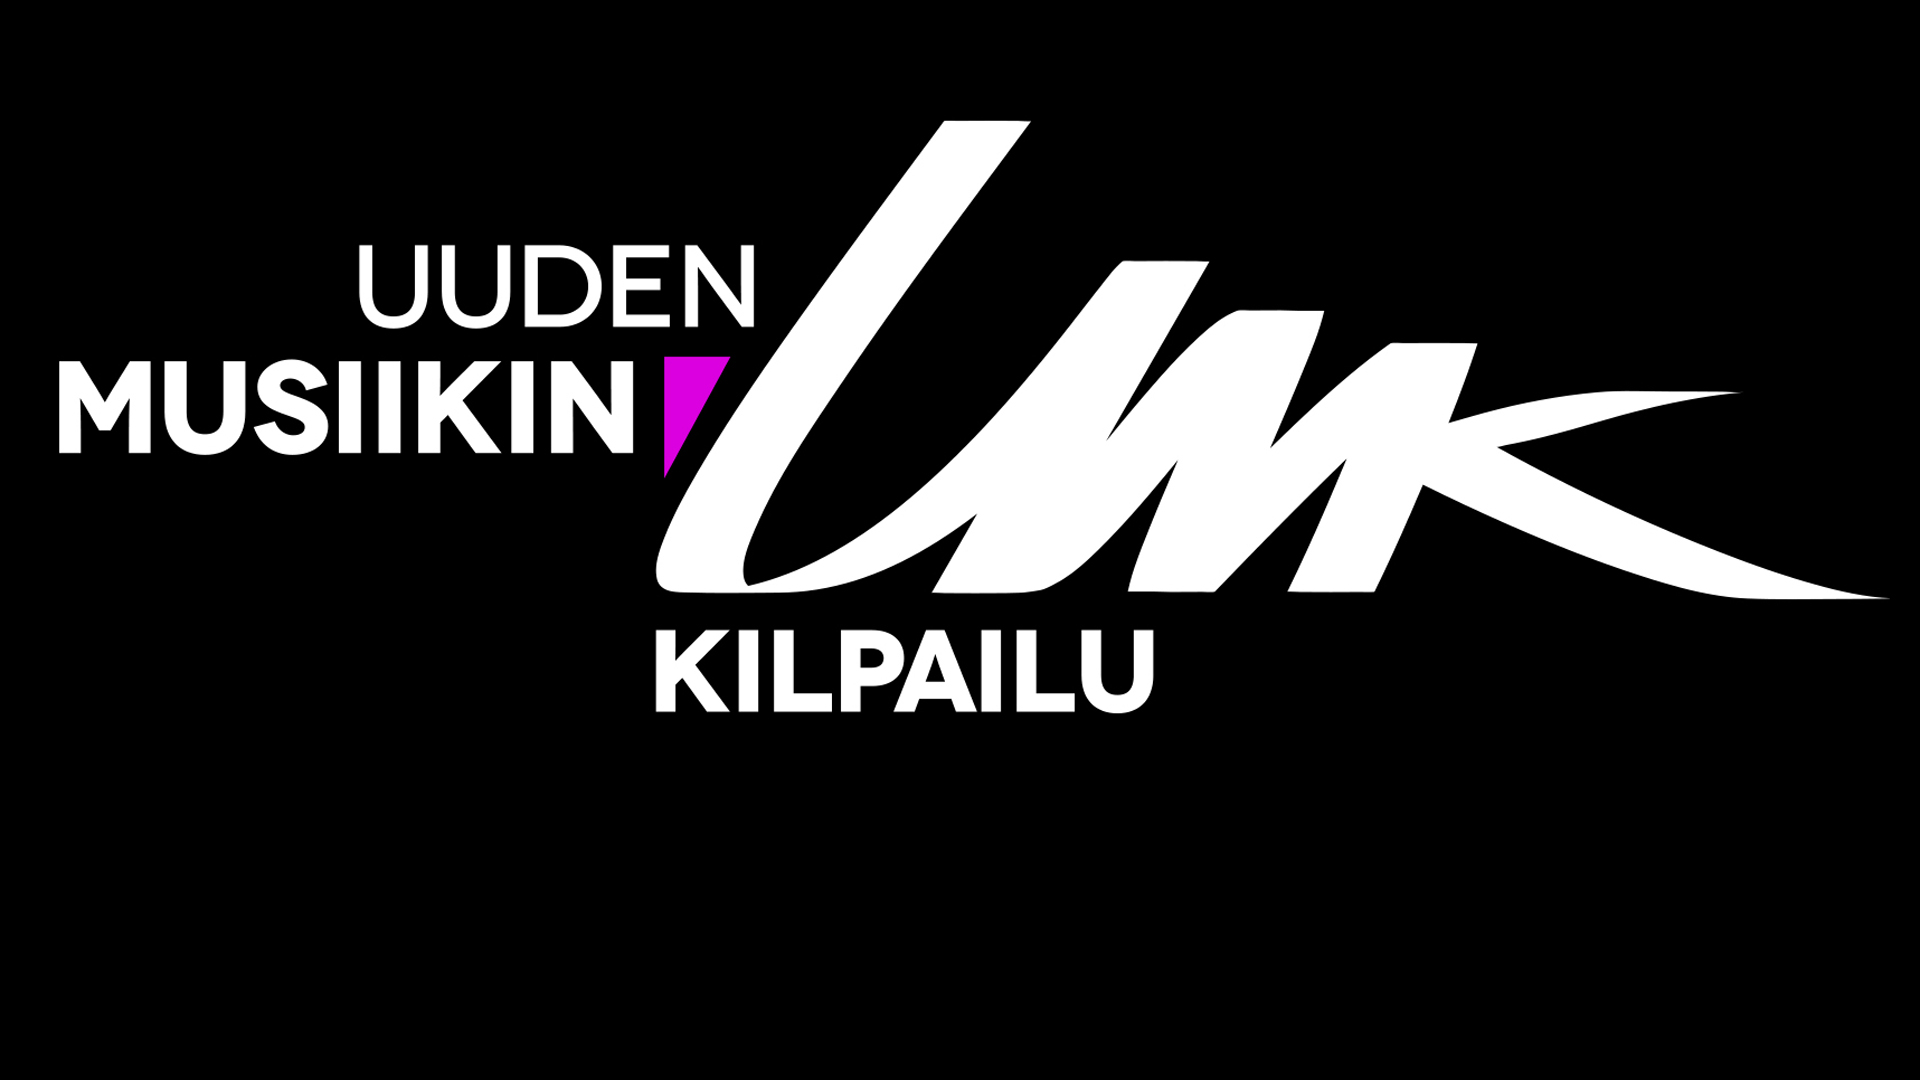 Finland: 12 finalists for UMK revealed